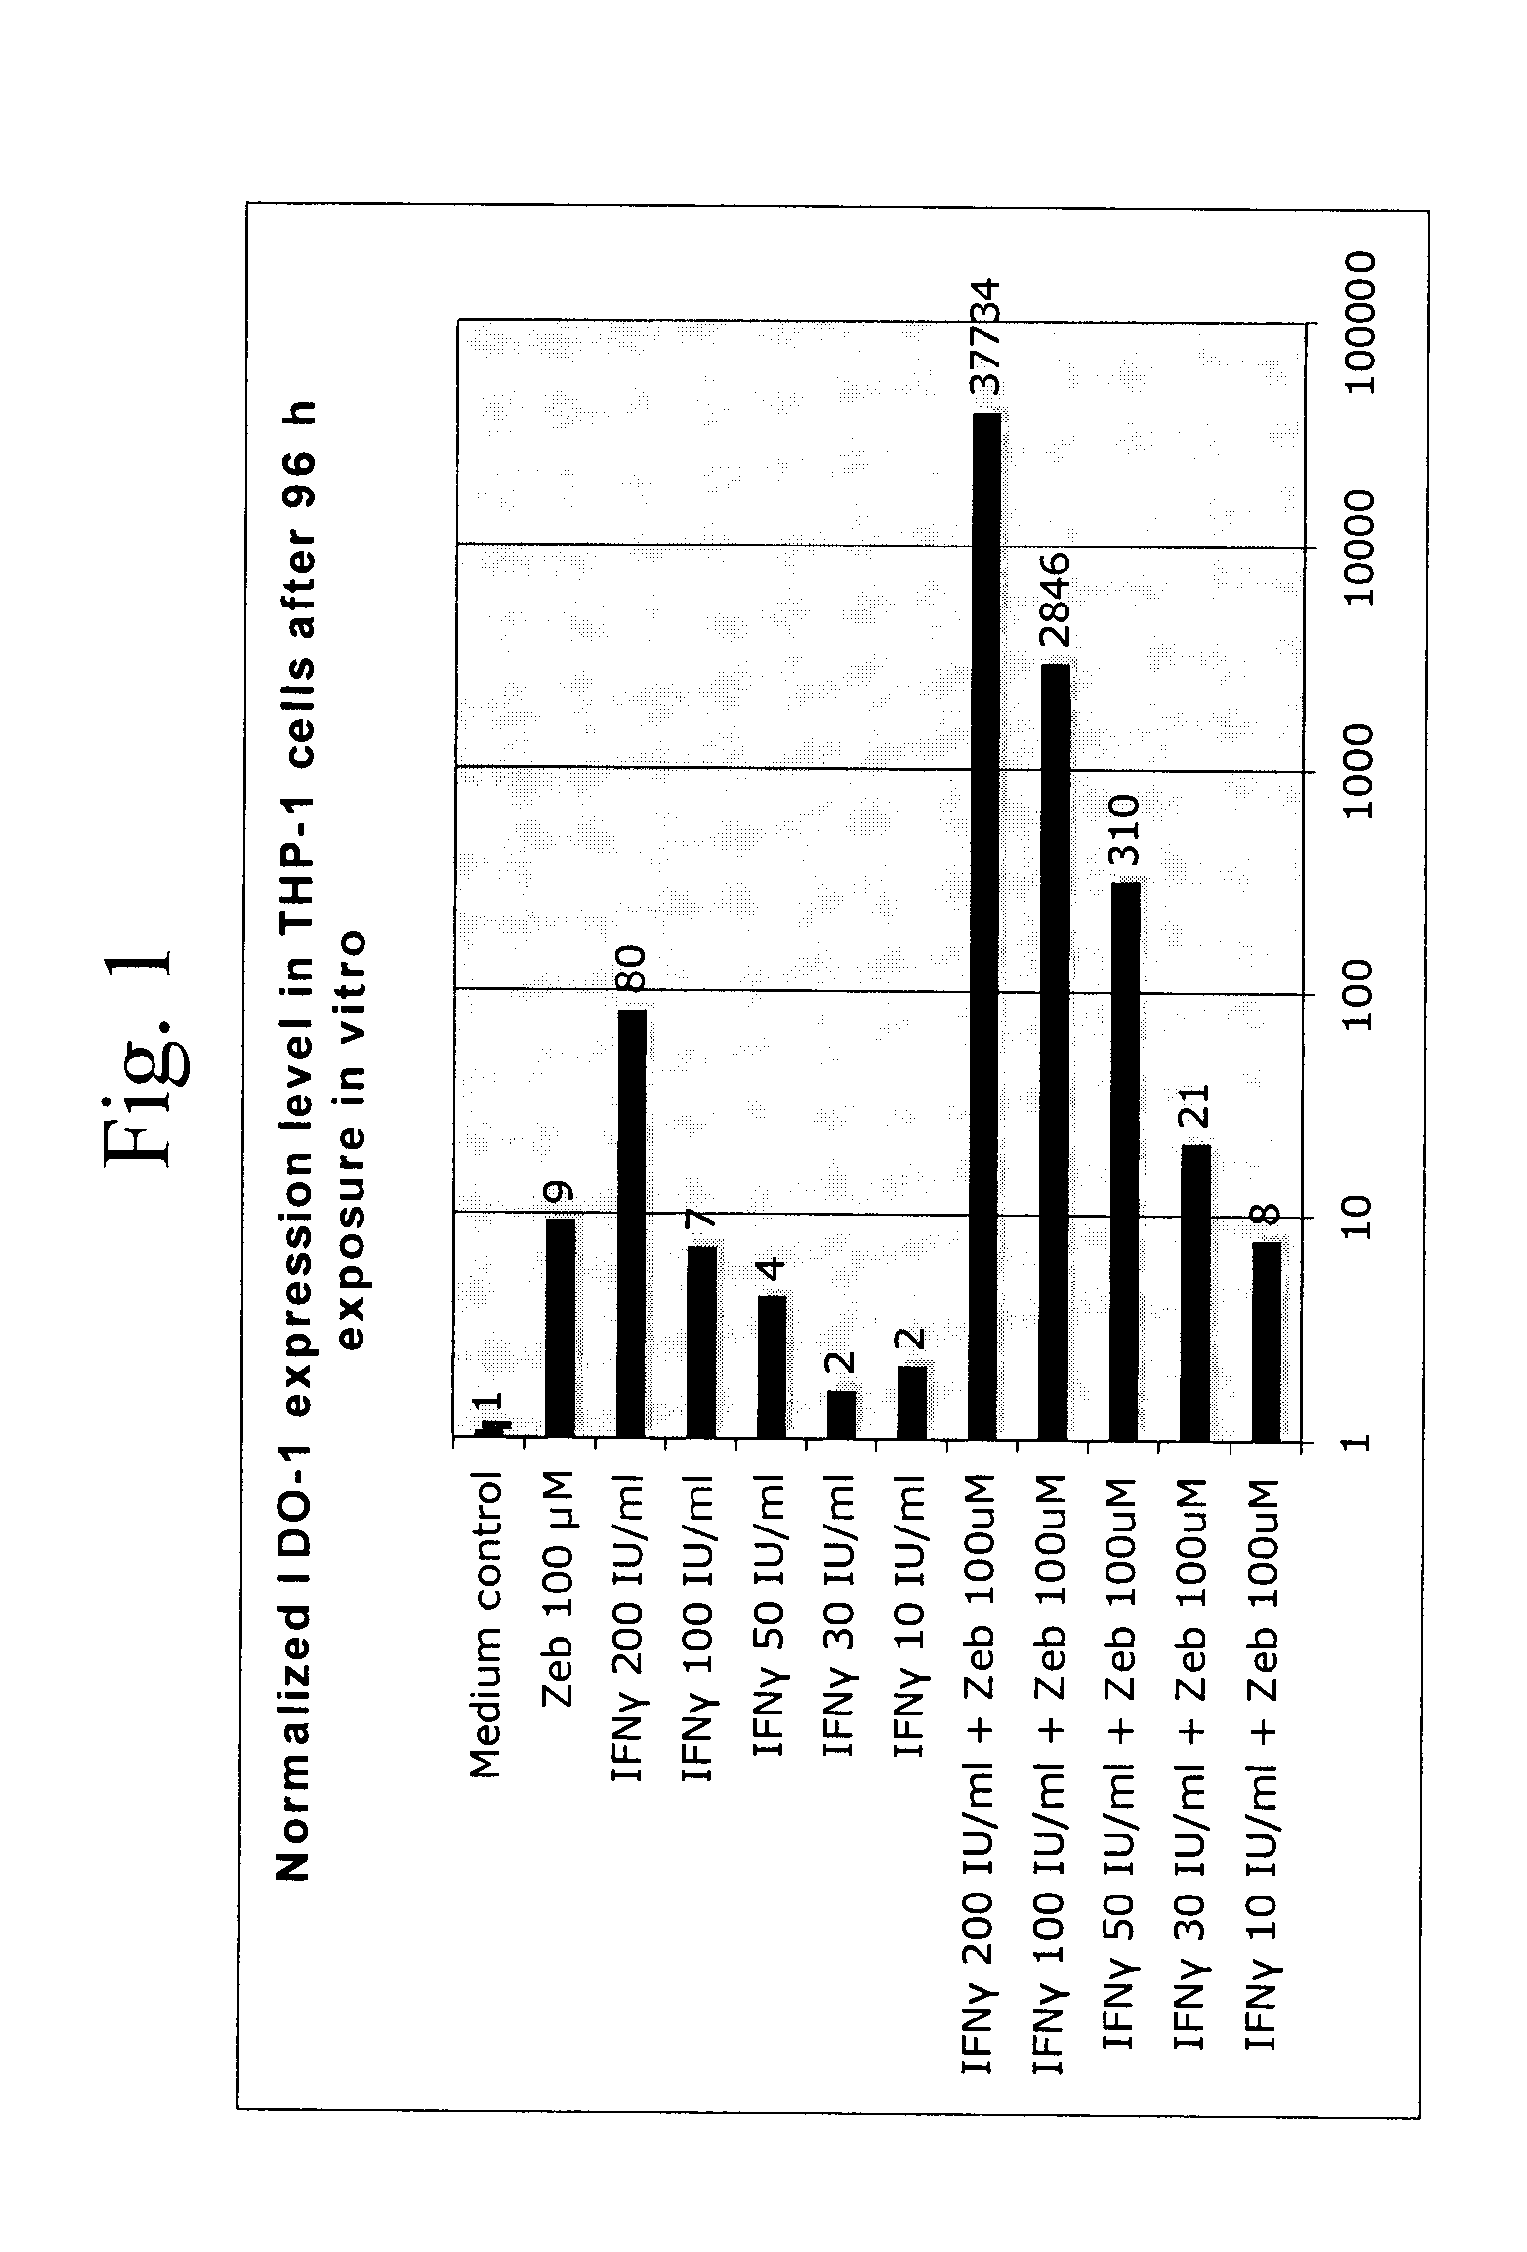 Composition Comprising At Least Two Compounds Which Induce Indolamine 2,3 - Dioxygenase (IDO), for the Treatment of an Autoimmune Disorder or Suffering from Immune Rejection of Organs